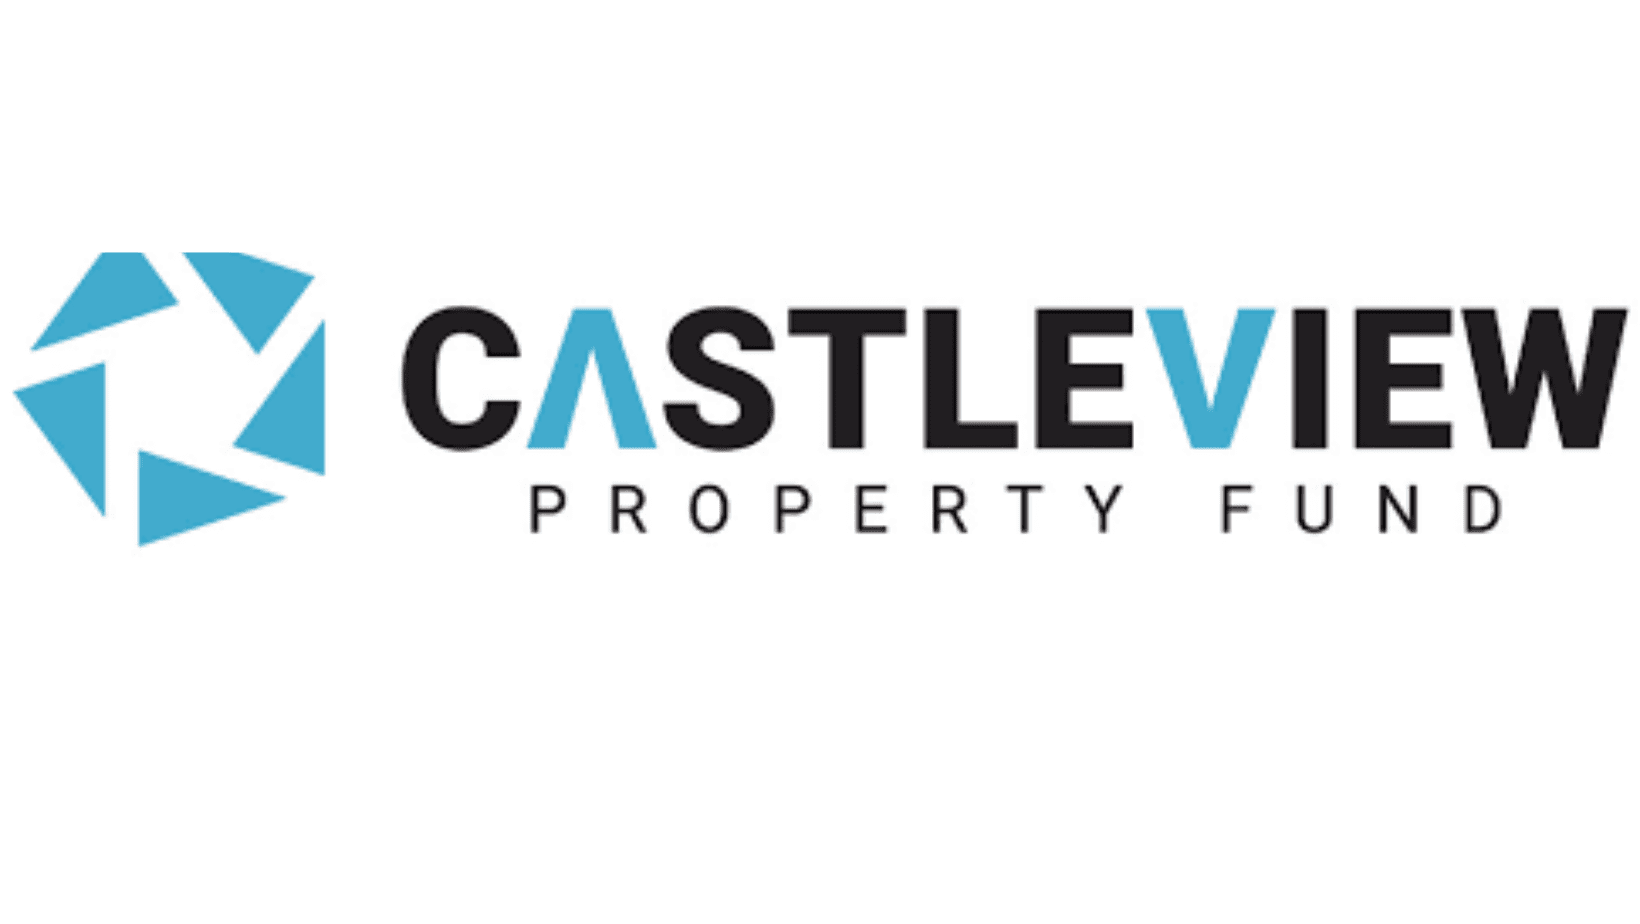 Castleview Property Fund Limited